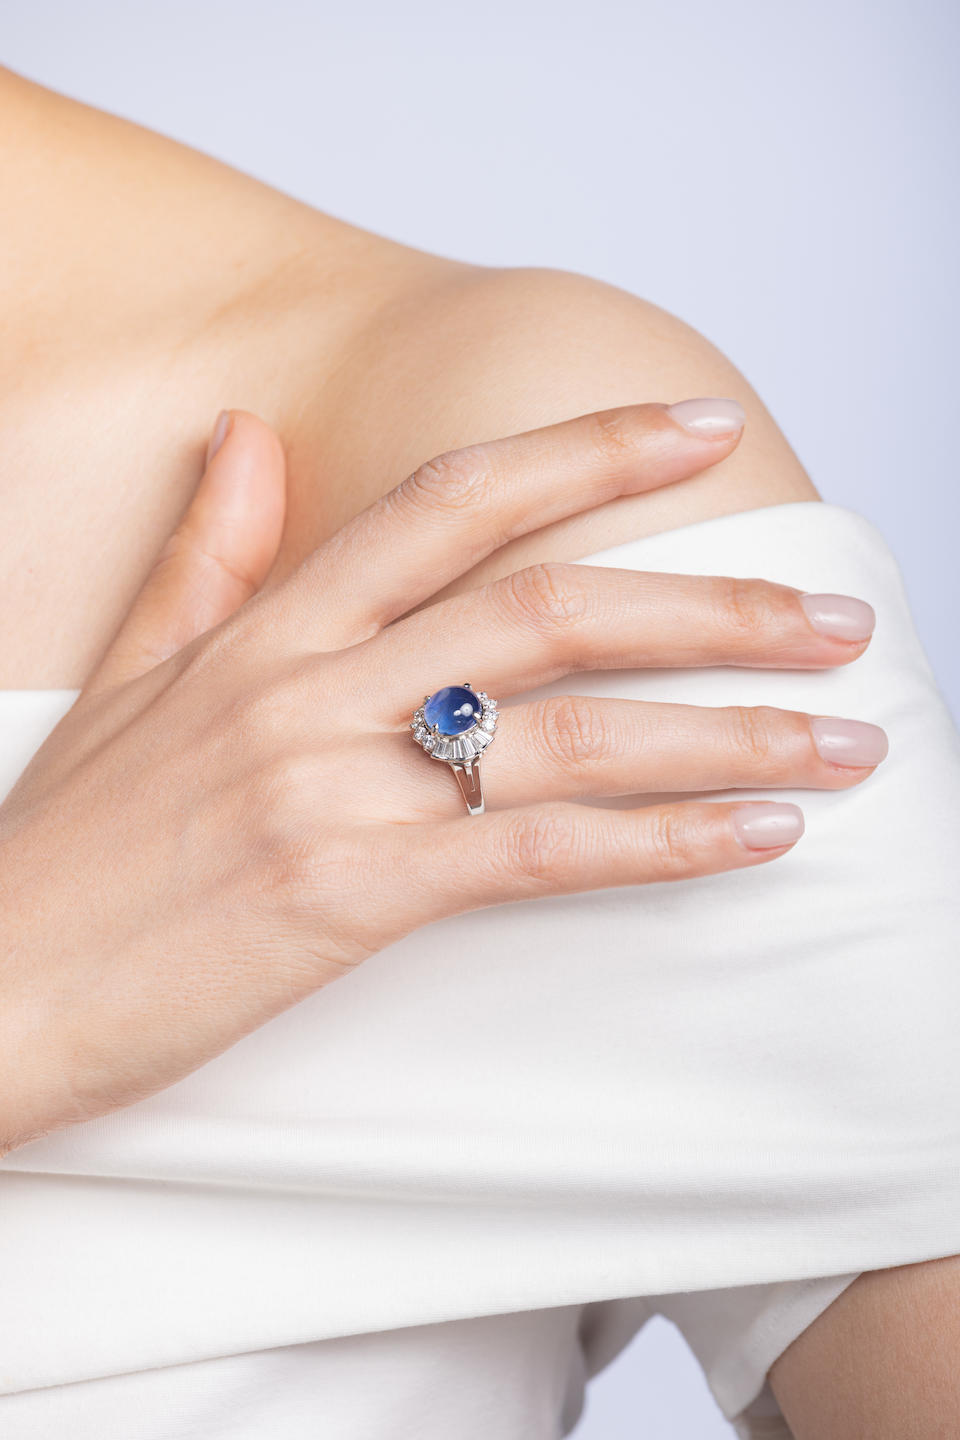 STAR SAPPHIRE AND DIAMOND RING - Image 3 of 3